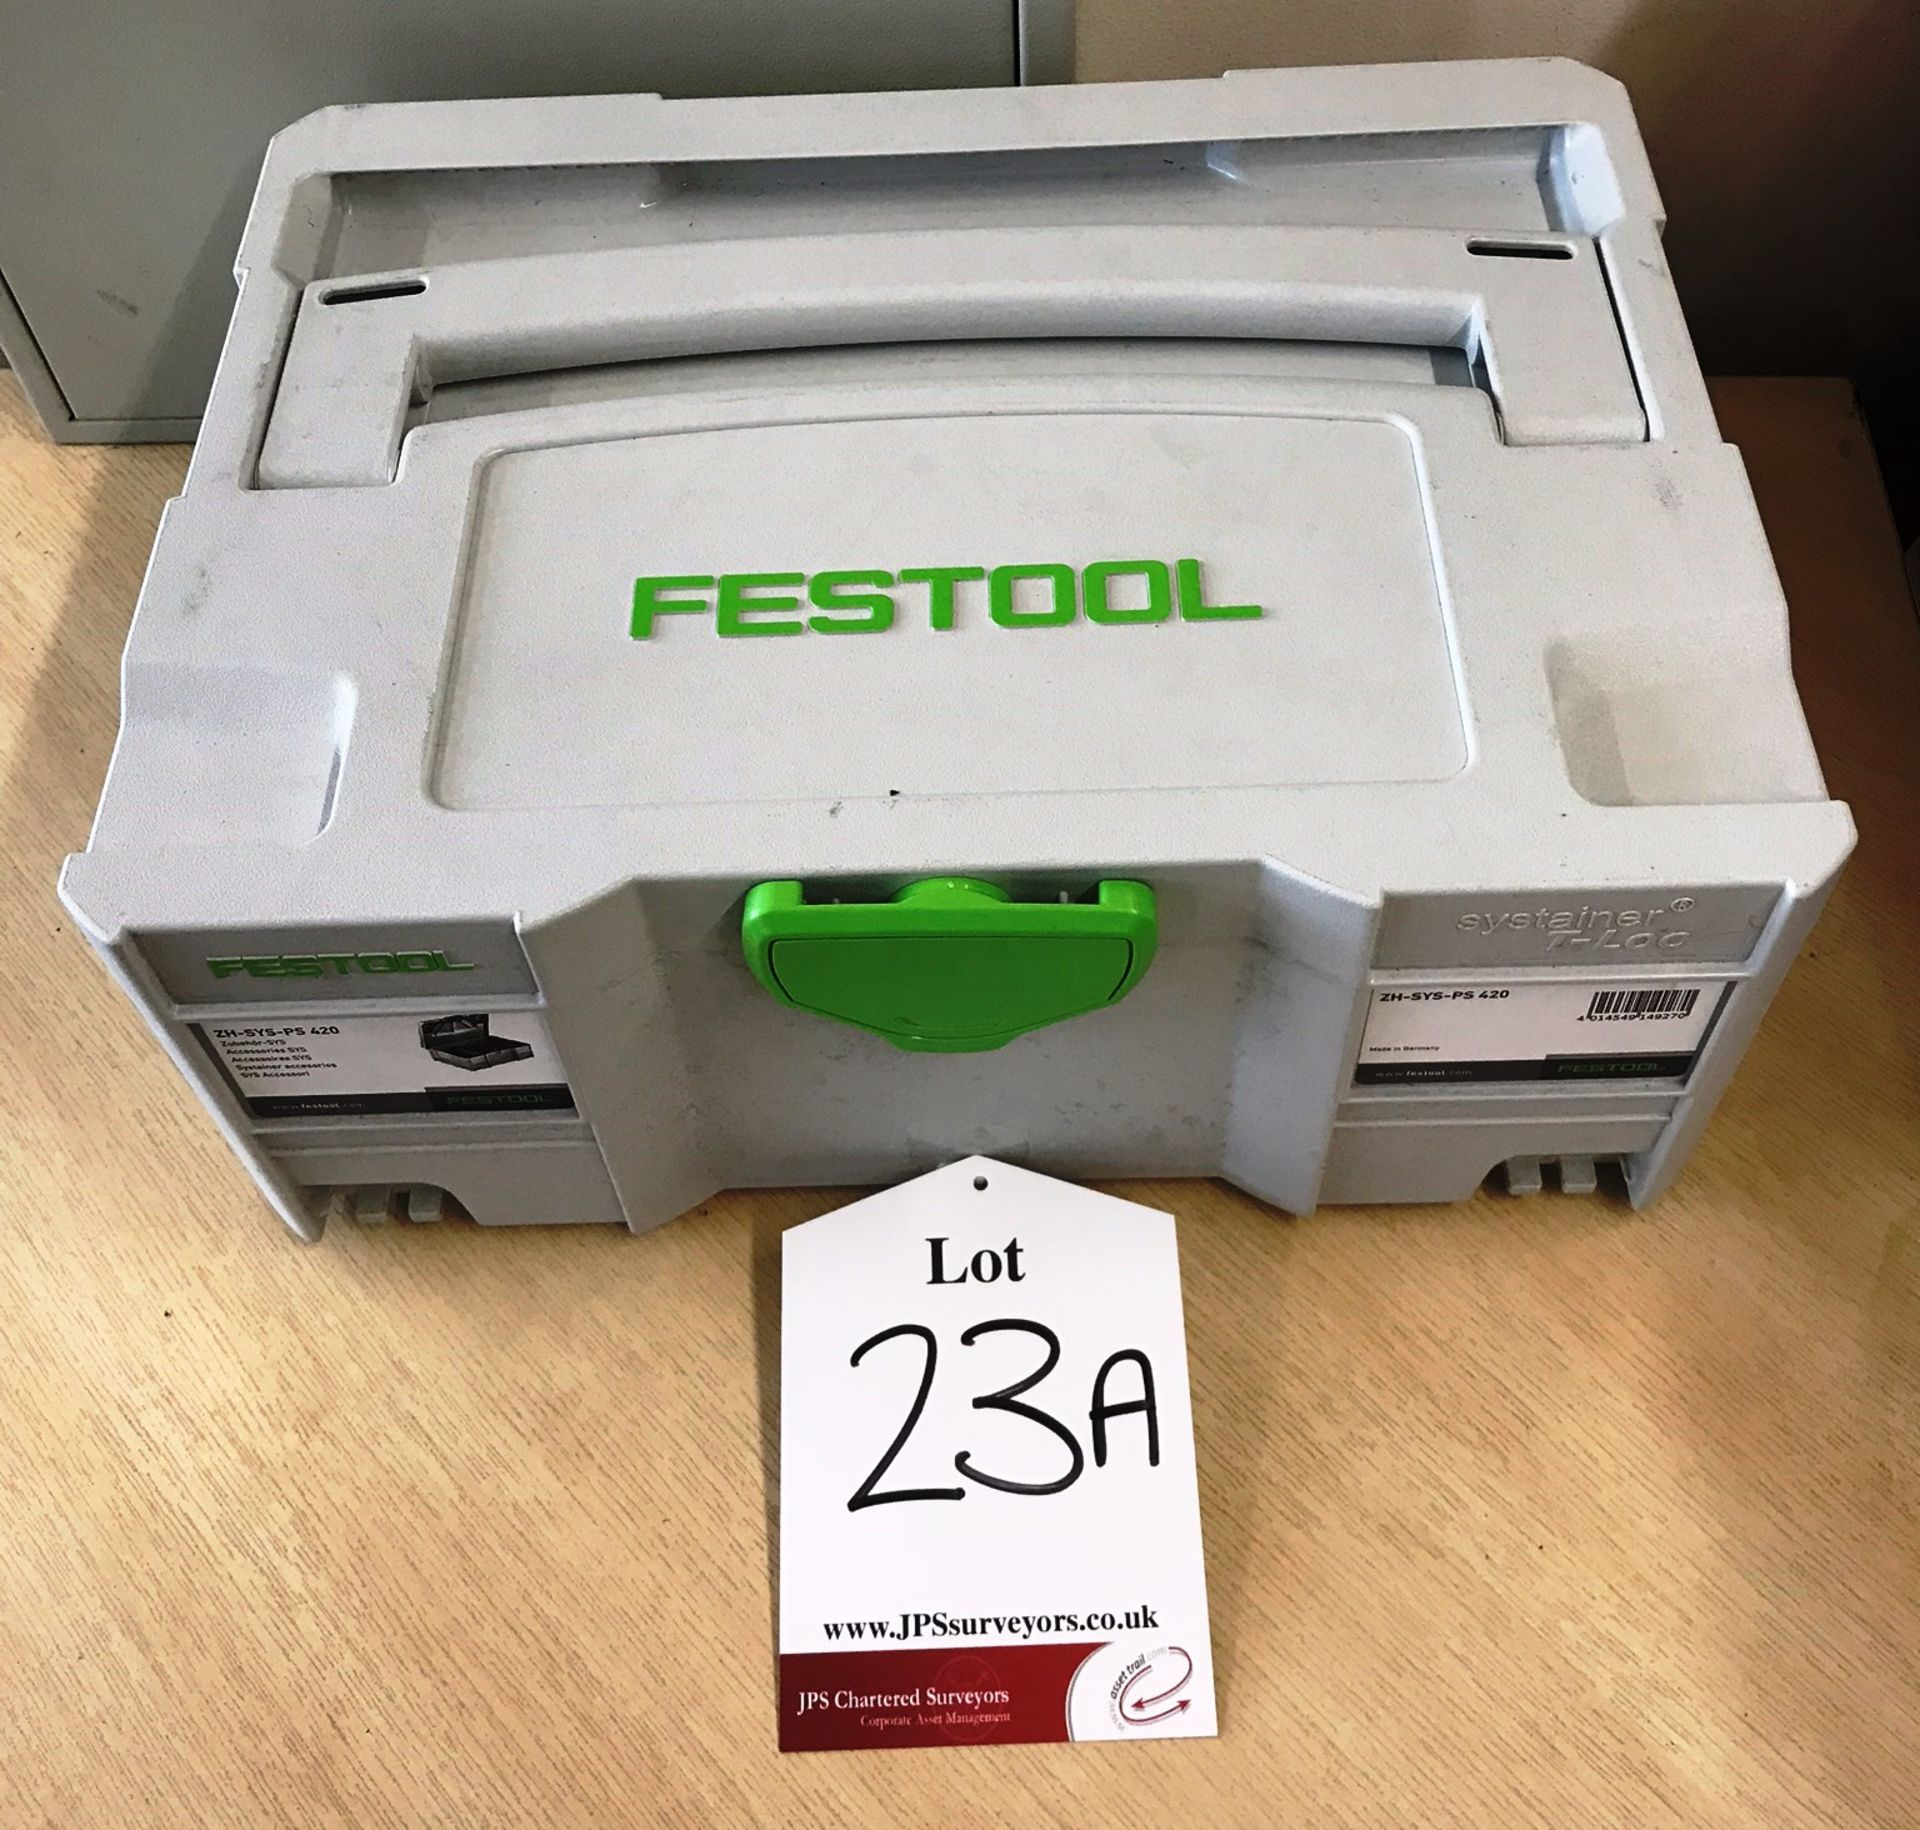 New Festool ZH-SYS-PS 420 Accessories System - White - Image 2 of 4